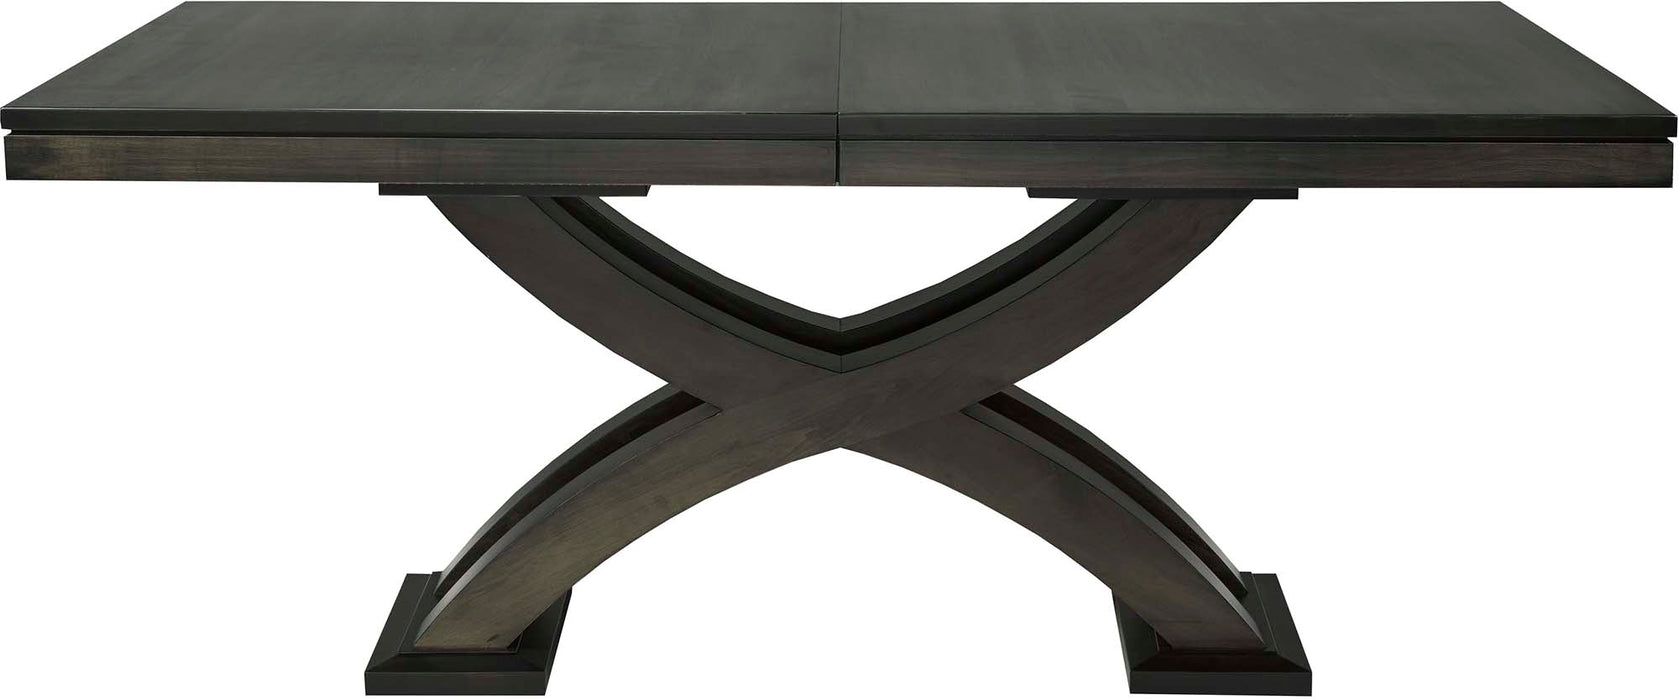 Empire Double Pedestal Dining Table